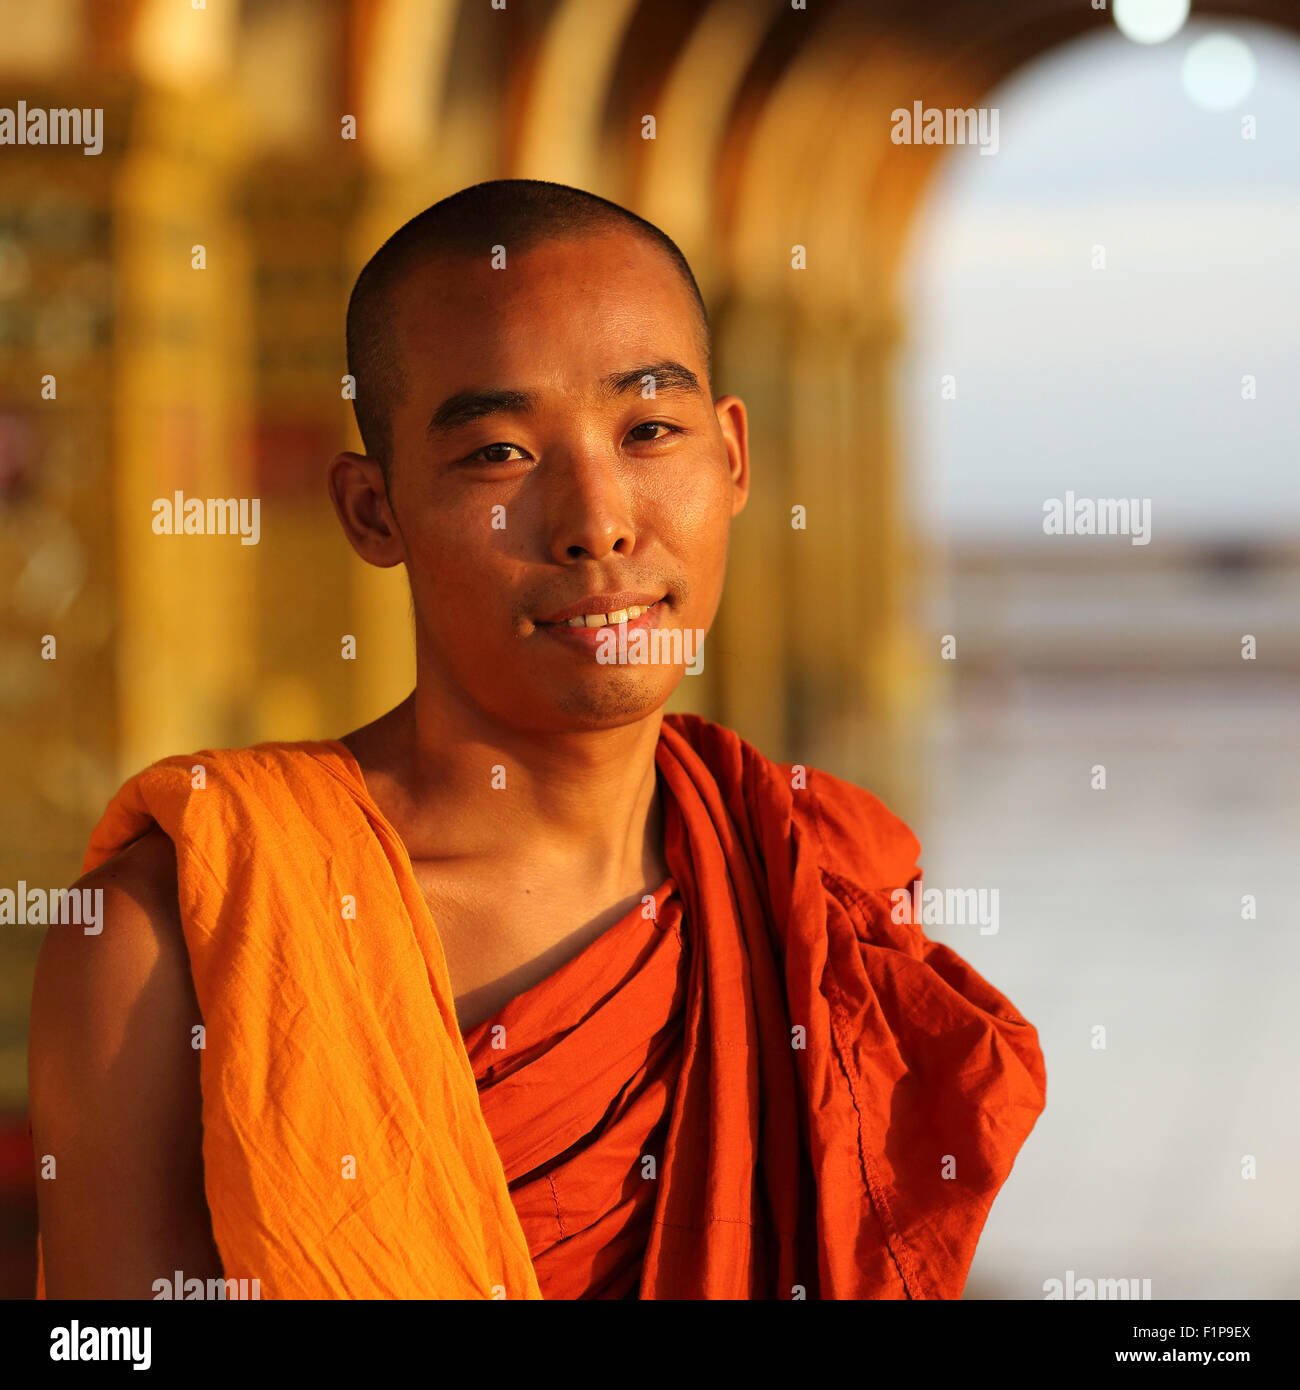 Buddhist monk at the Sutaungpyei Pagoda in Mandalay, Myanmar. The monk stands under one of the temple's arches. Stock Photo